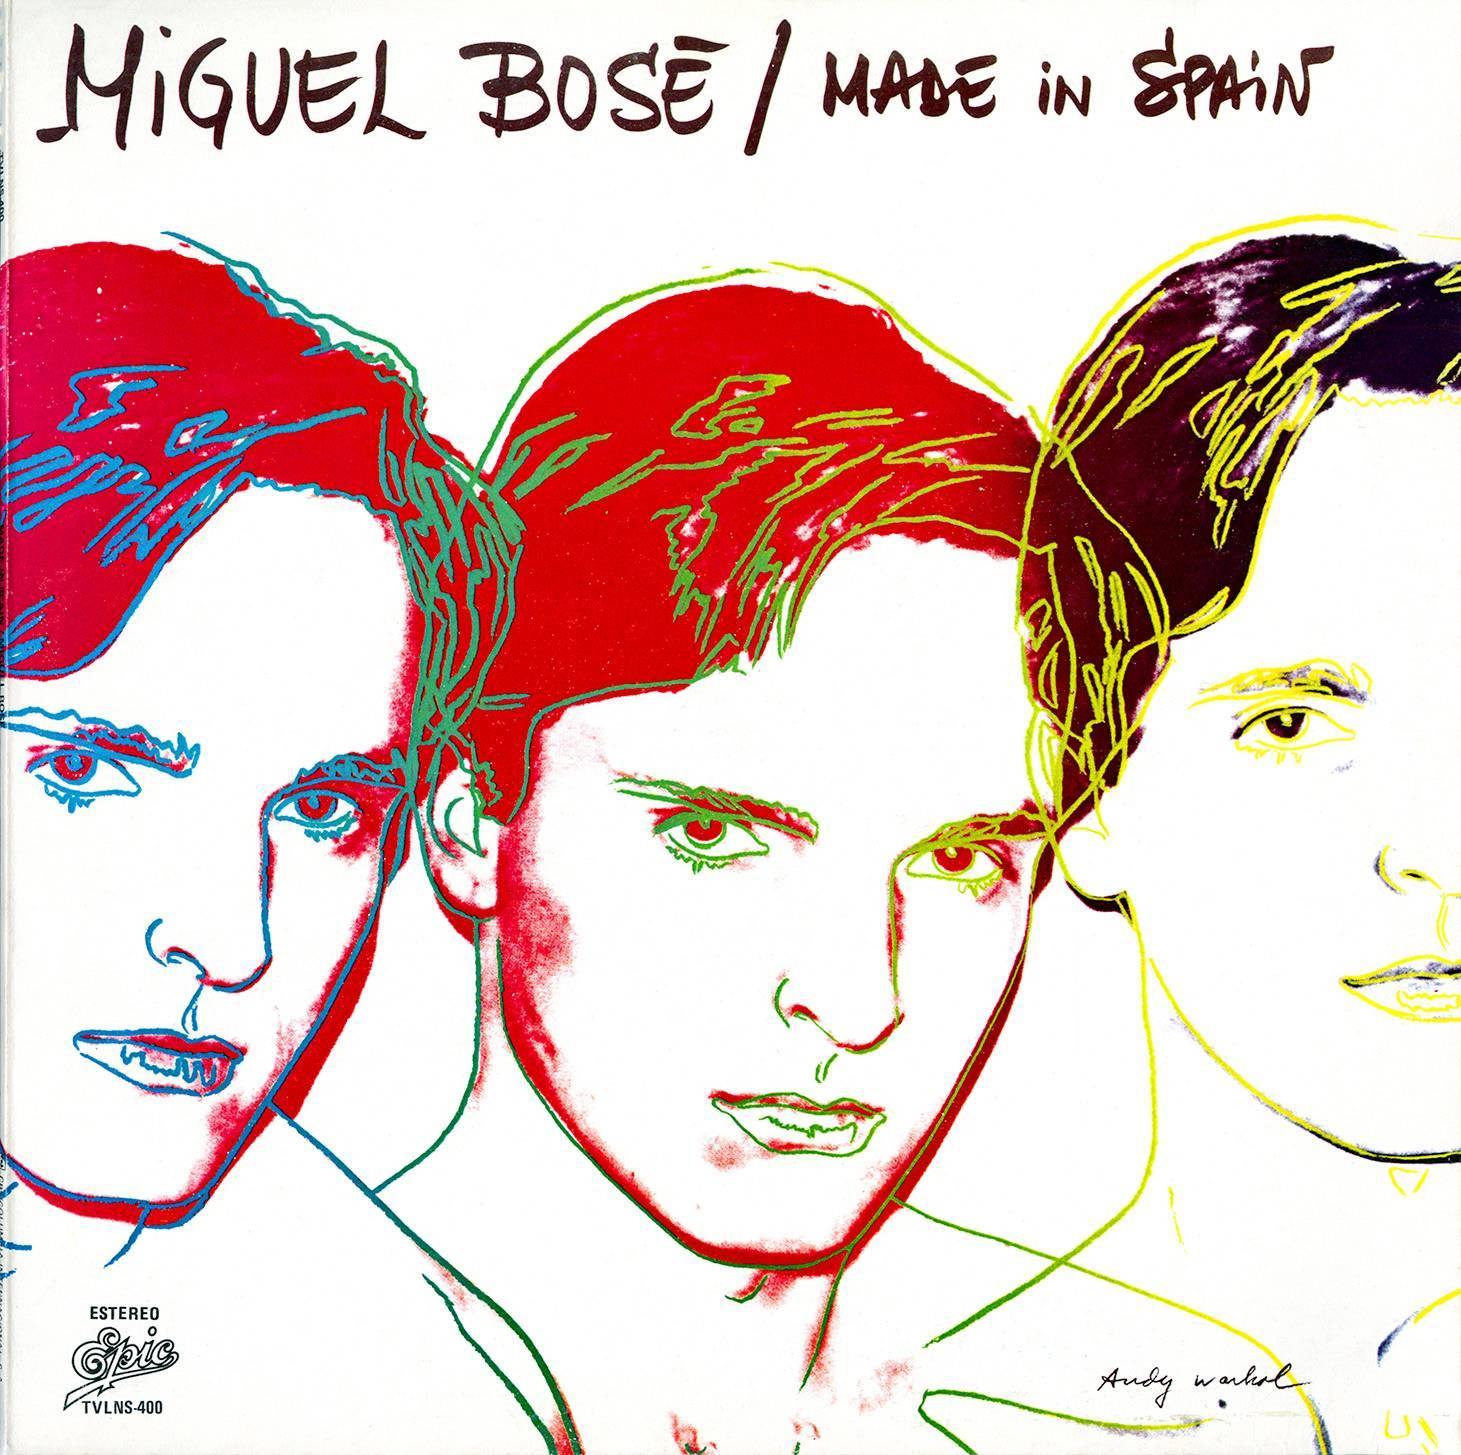 1983 1st pressing, Miguel Bose, Mad In Spain Vinyl Album featuring Original Cover Art by Andy Warhol. 

Cover: Off-set print of Warhol's original screen print from the same year
12 x 12 Inches (30.48 x 30.48 cm)
Plate signed by Warhol on lower